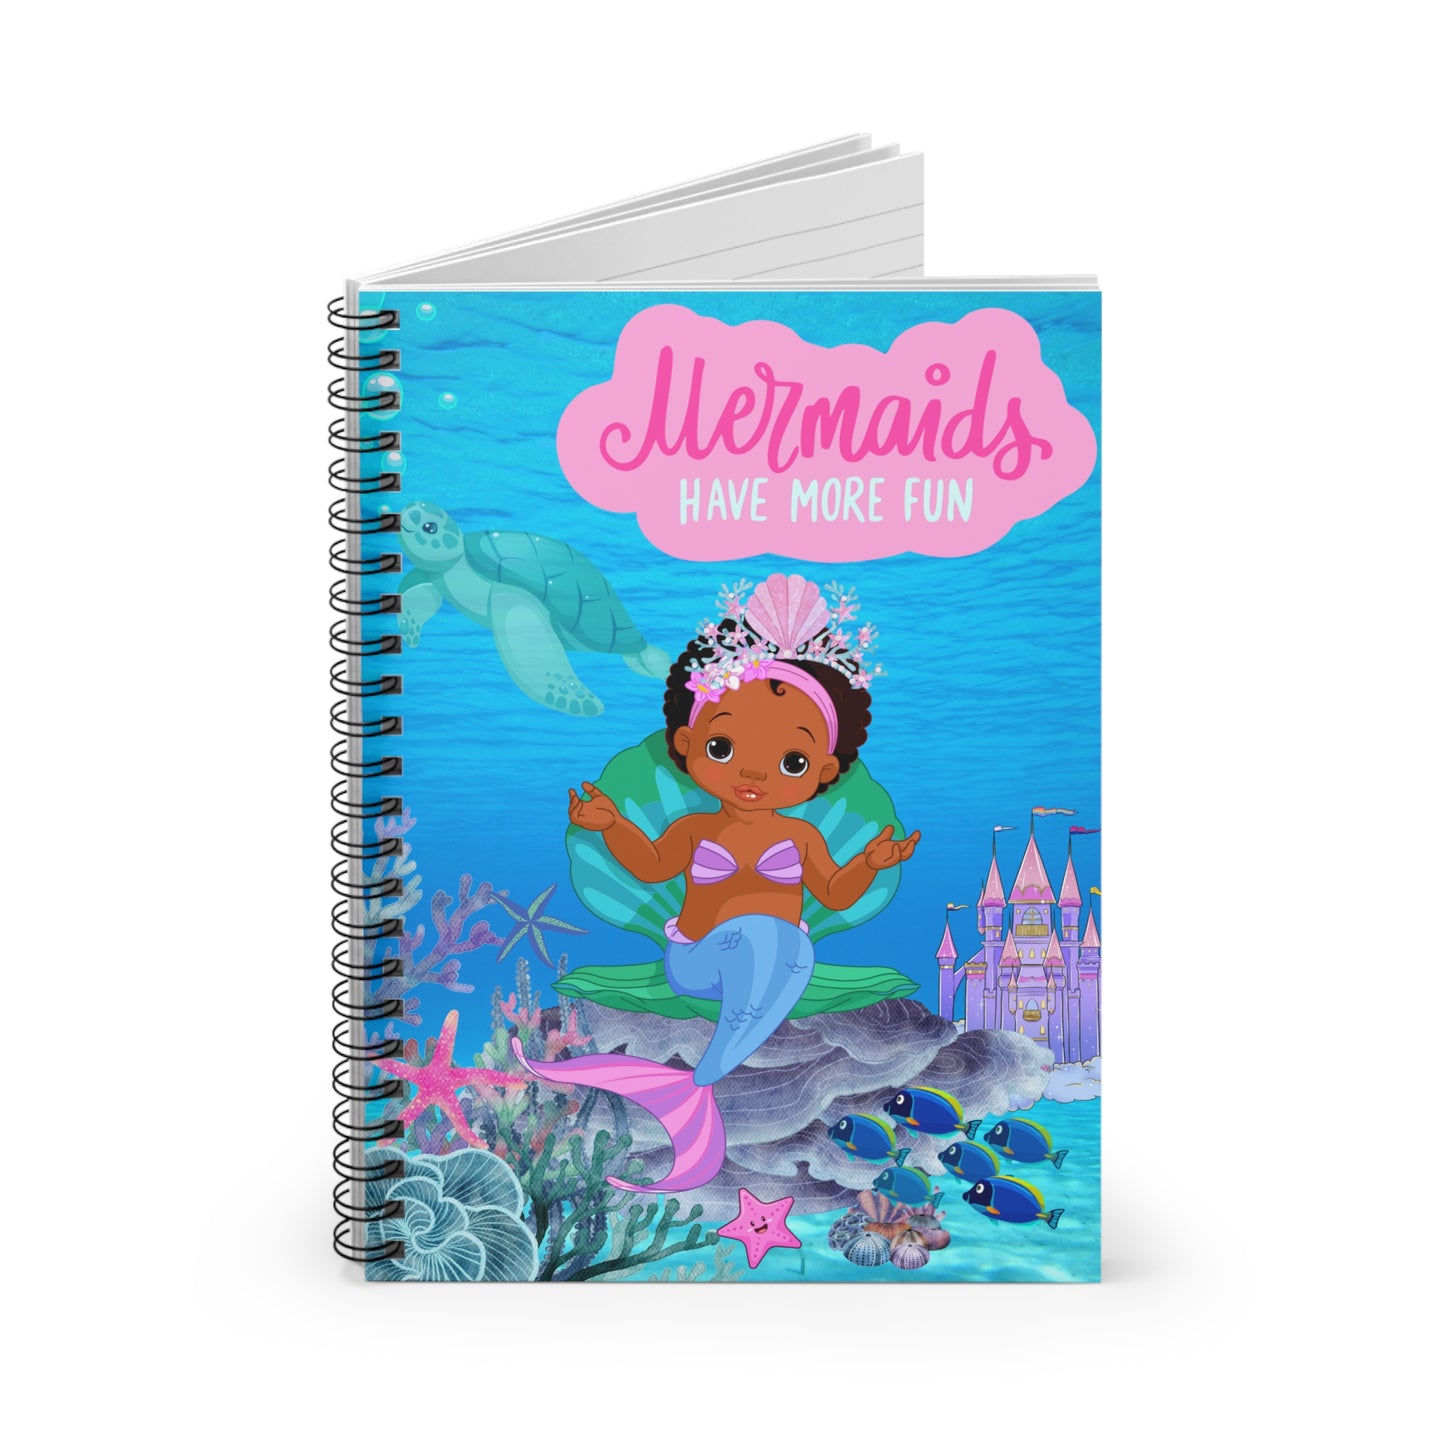 Mermaids Have More Fun Spiral Notebook - Ruled Line